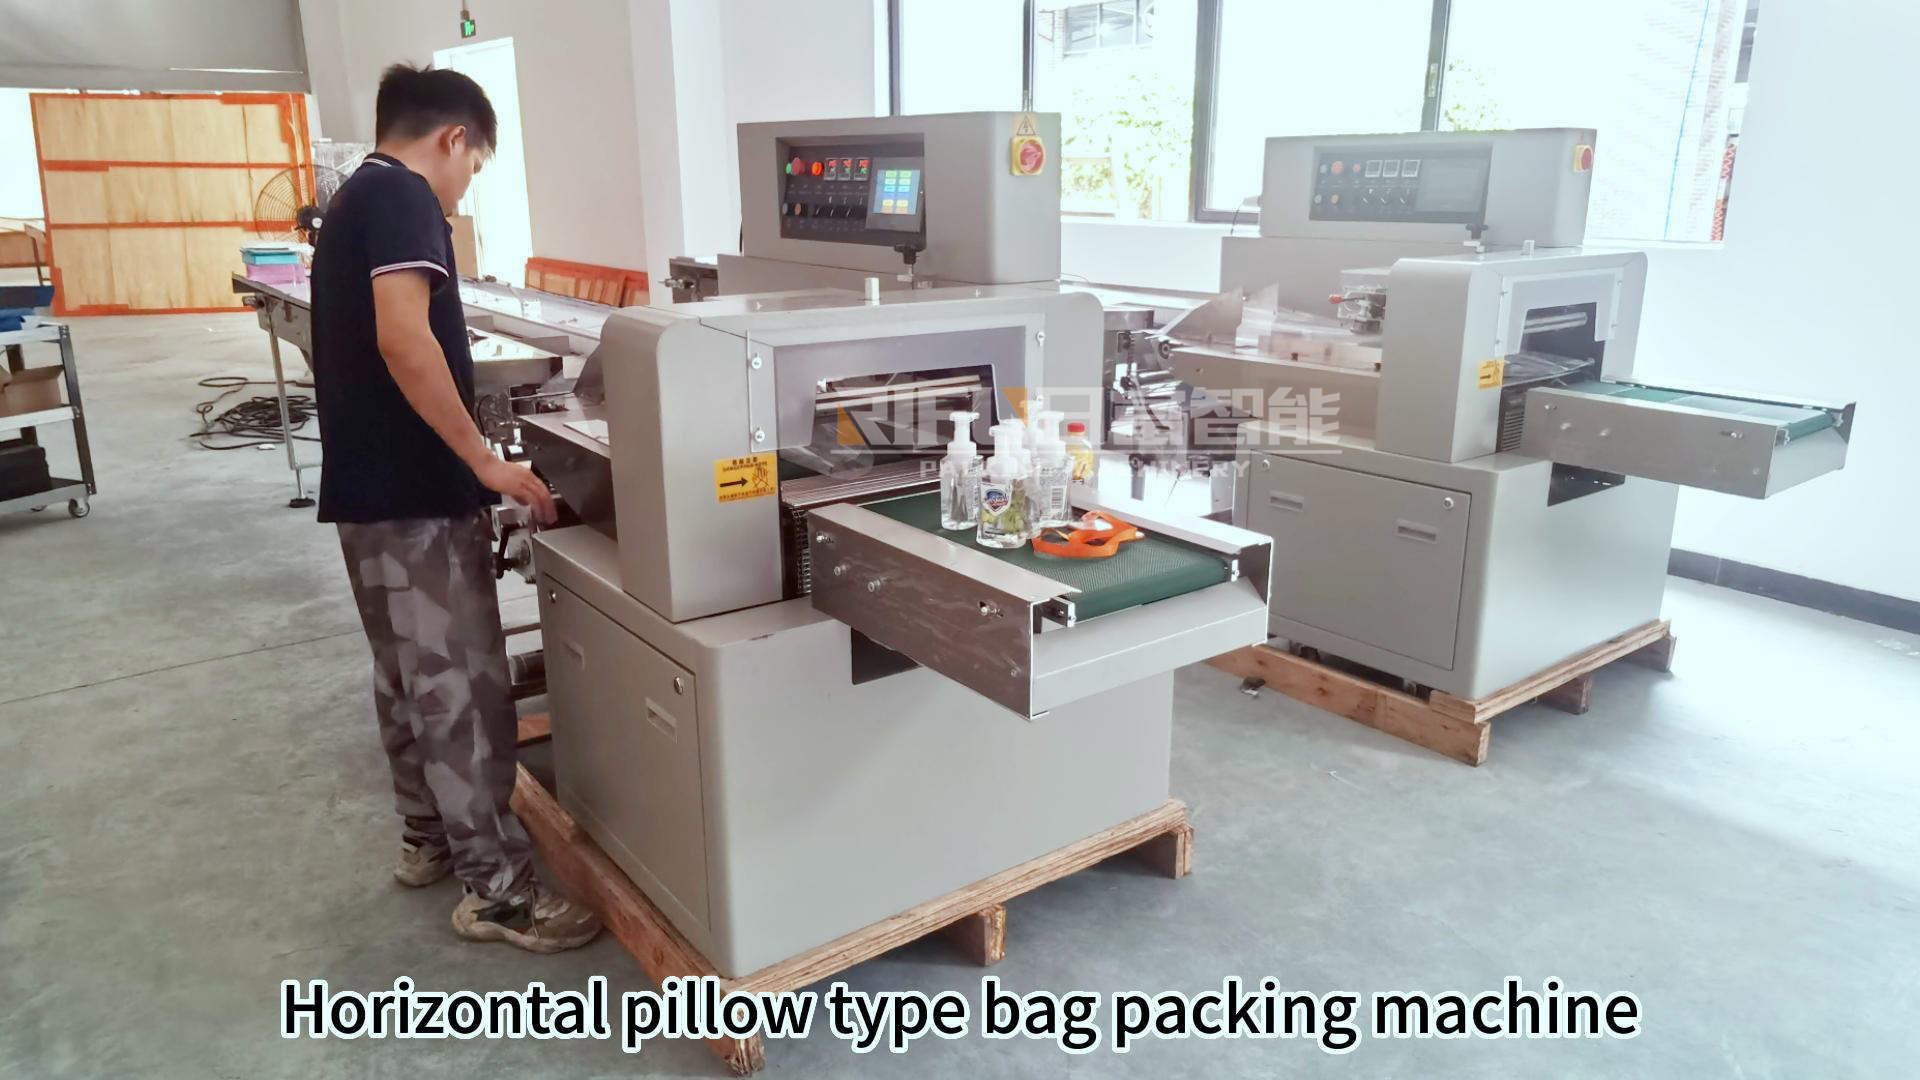 What Machine Can Be Used to Pack French Bread into a Pillow Bag